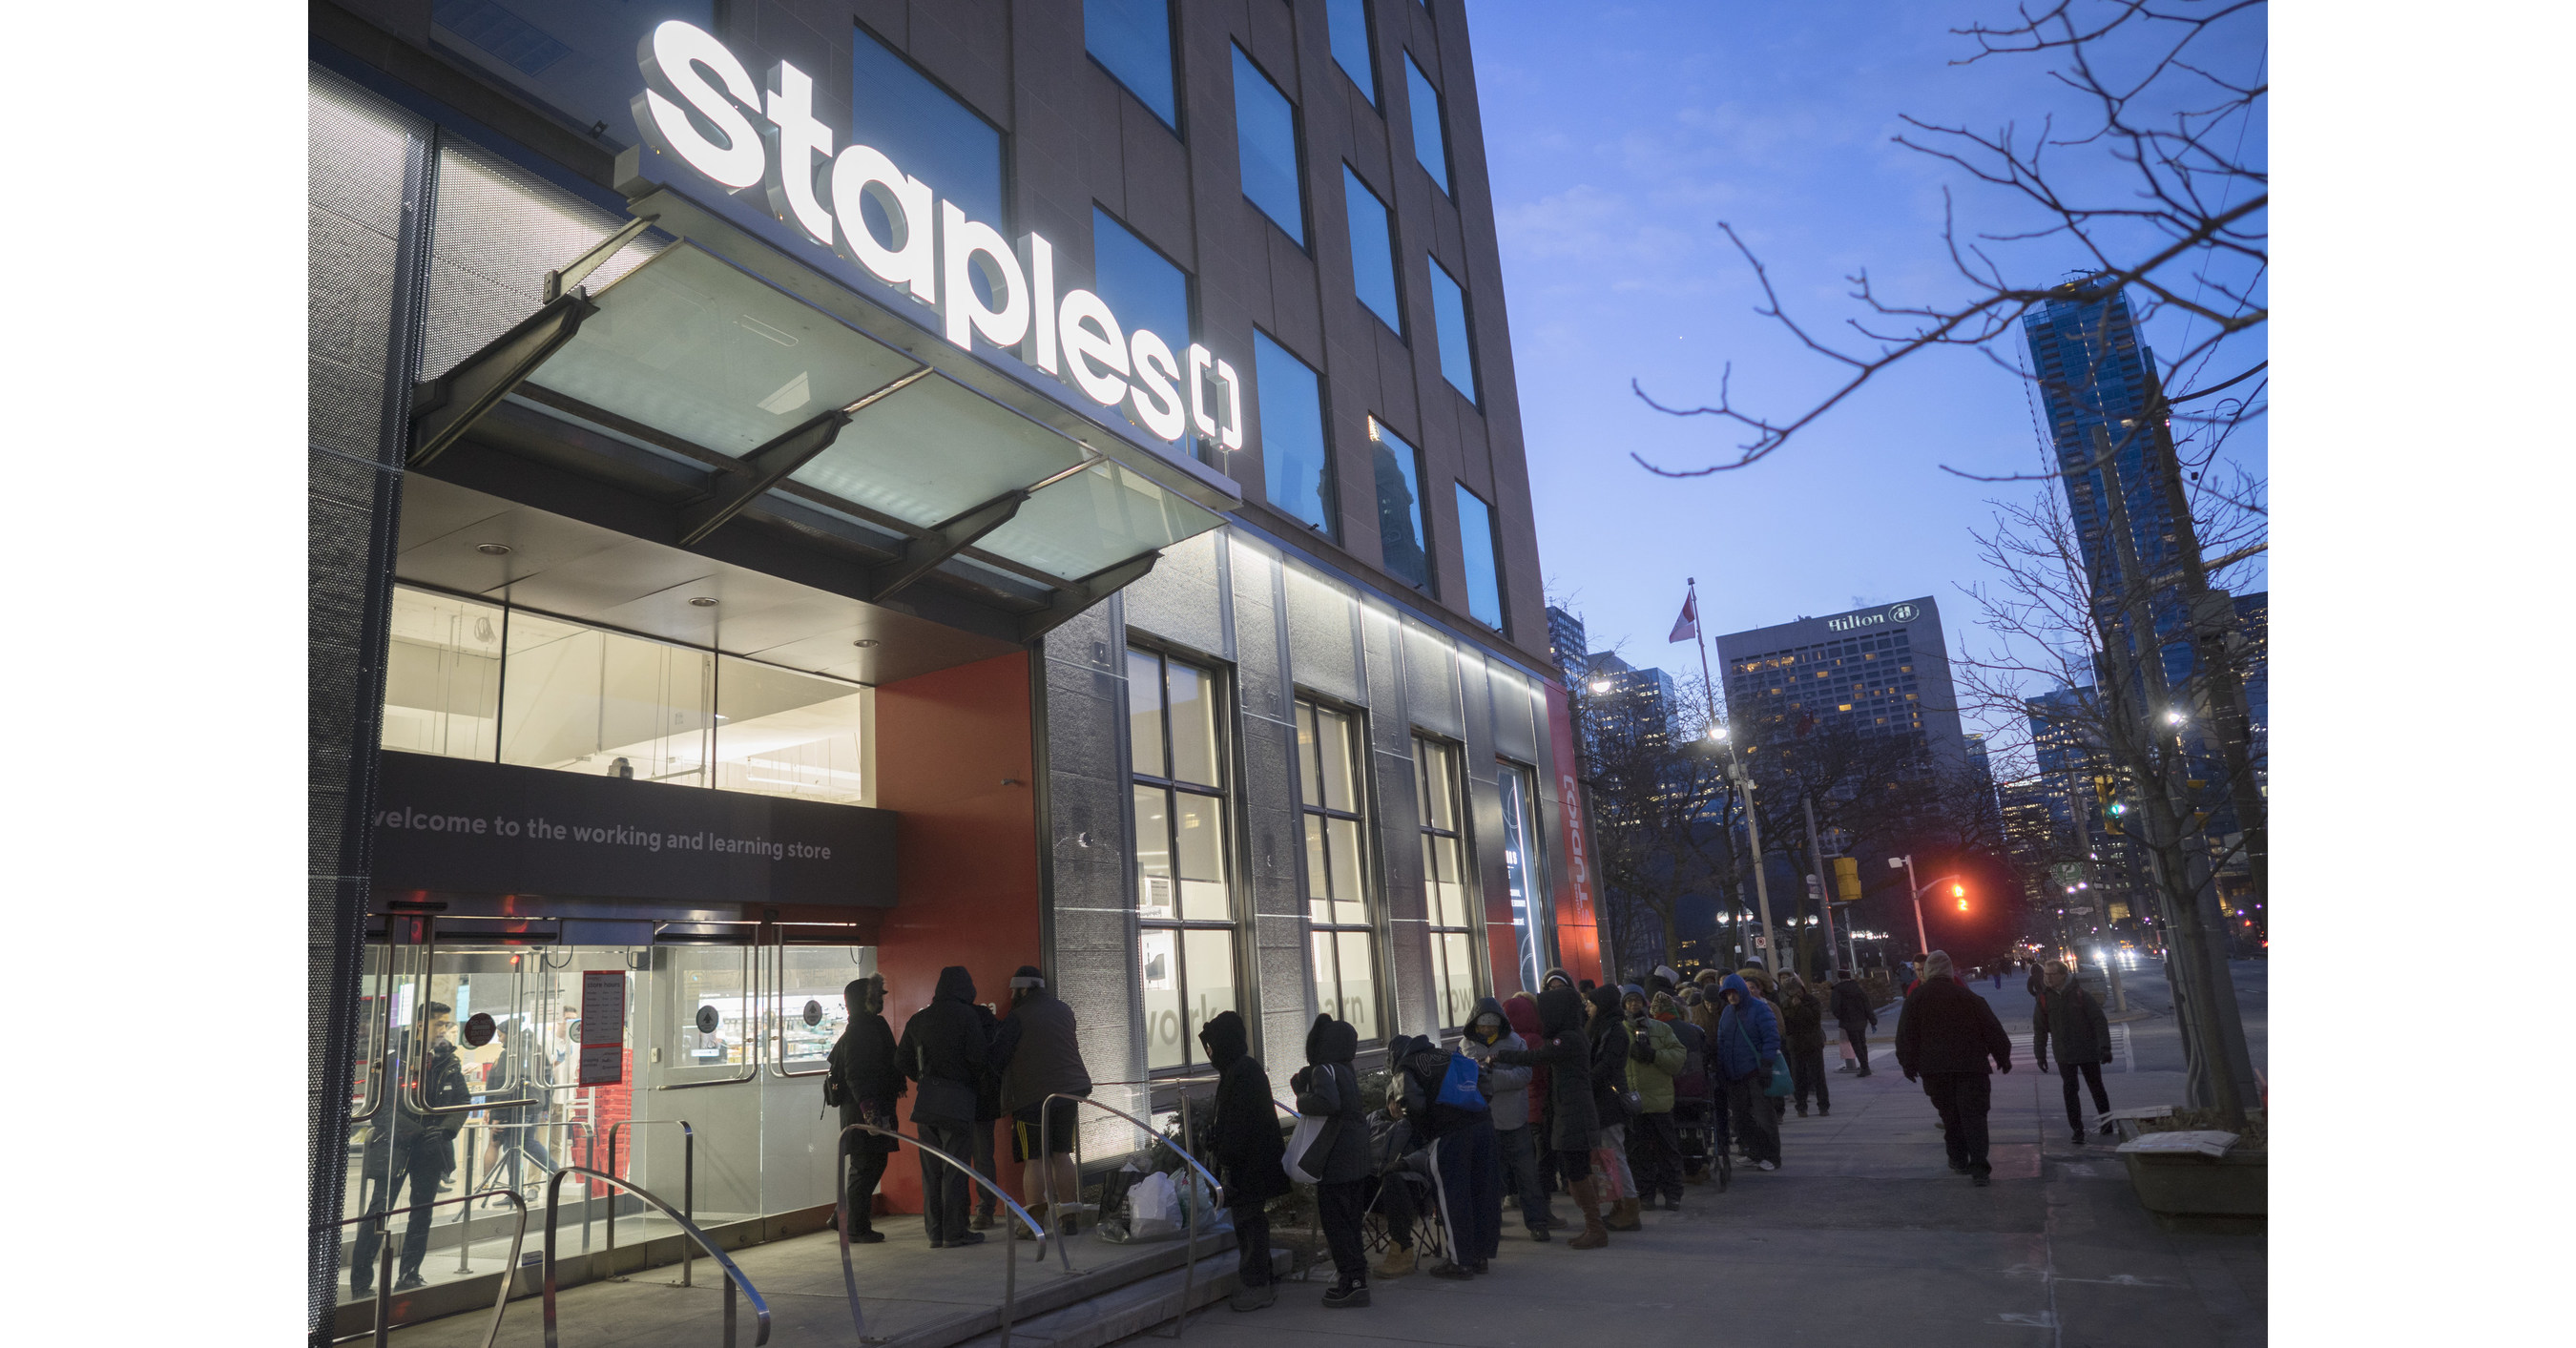 Staples Canada Signs Partnership With Bell for In-Store Kiosks at More Than  300 Stores